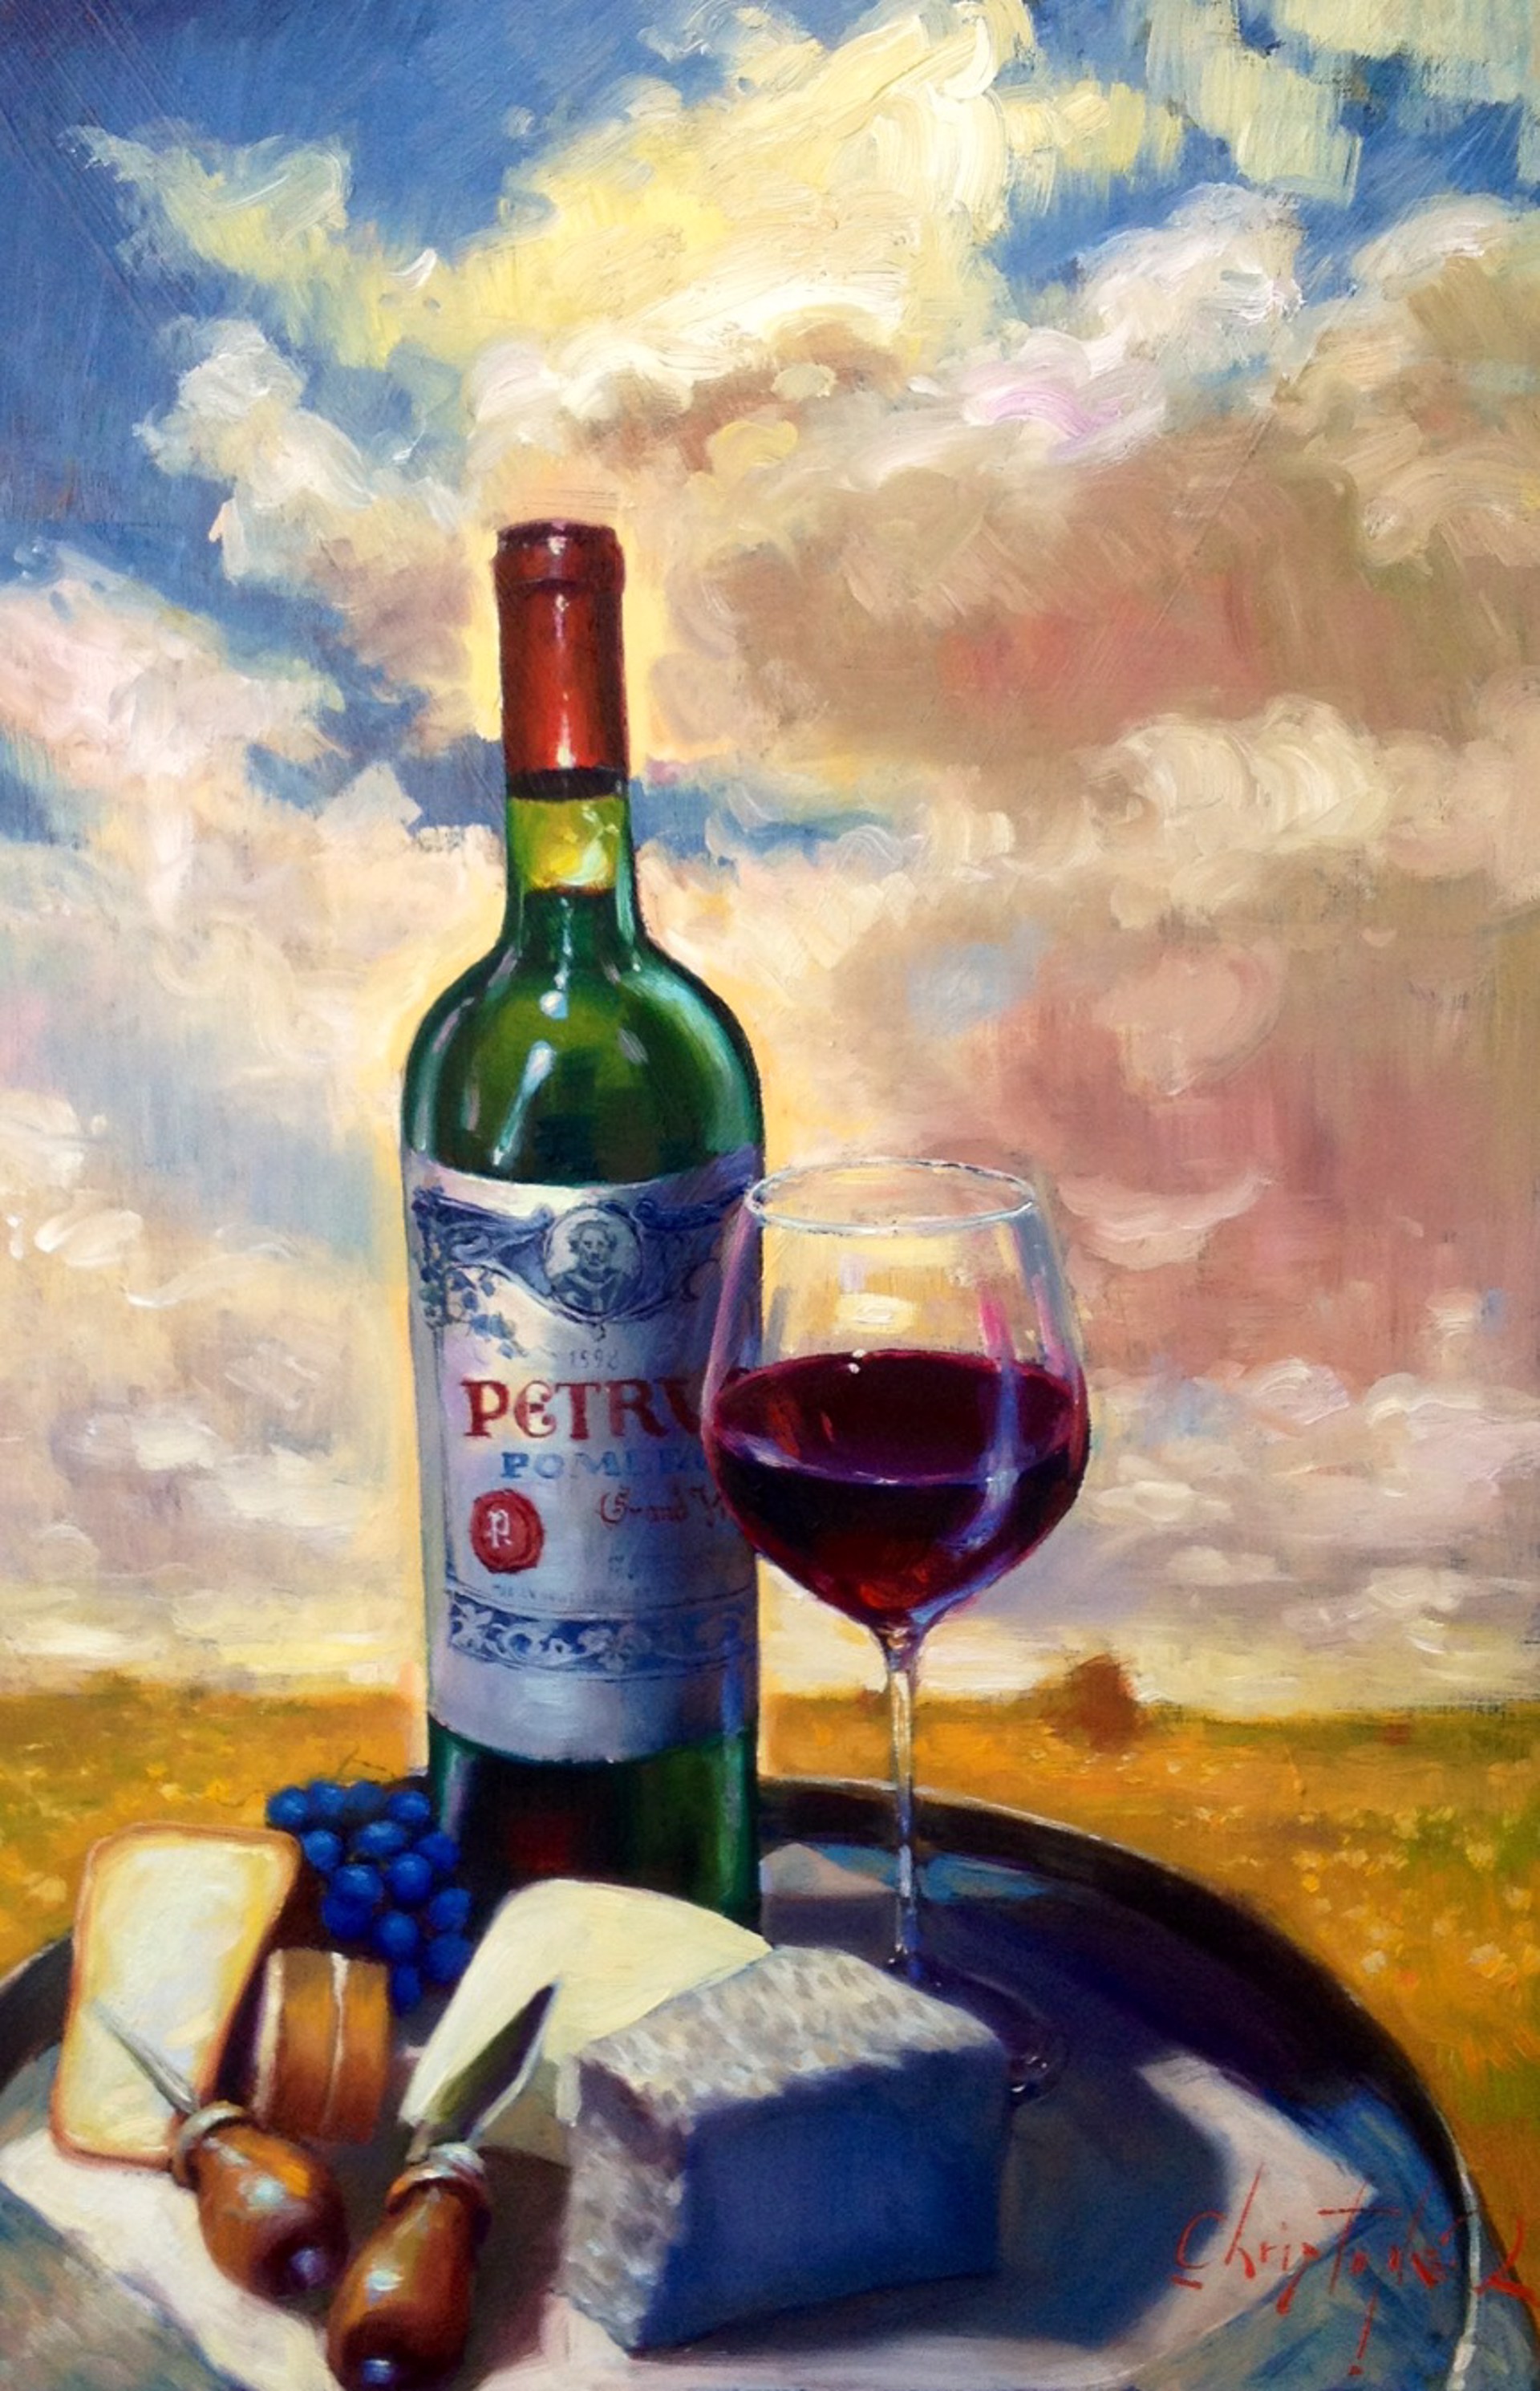 Petrus Pairing by Christopher M